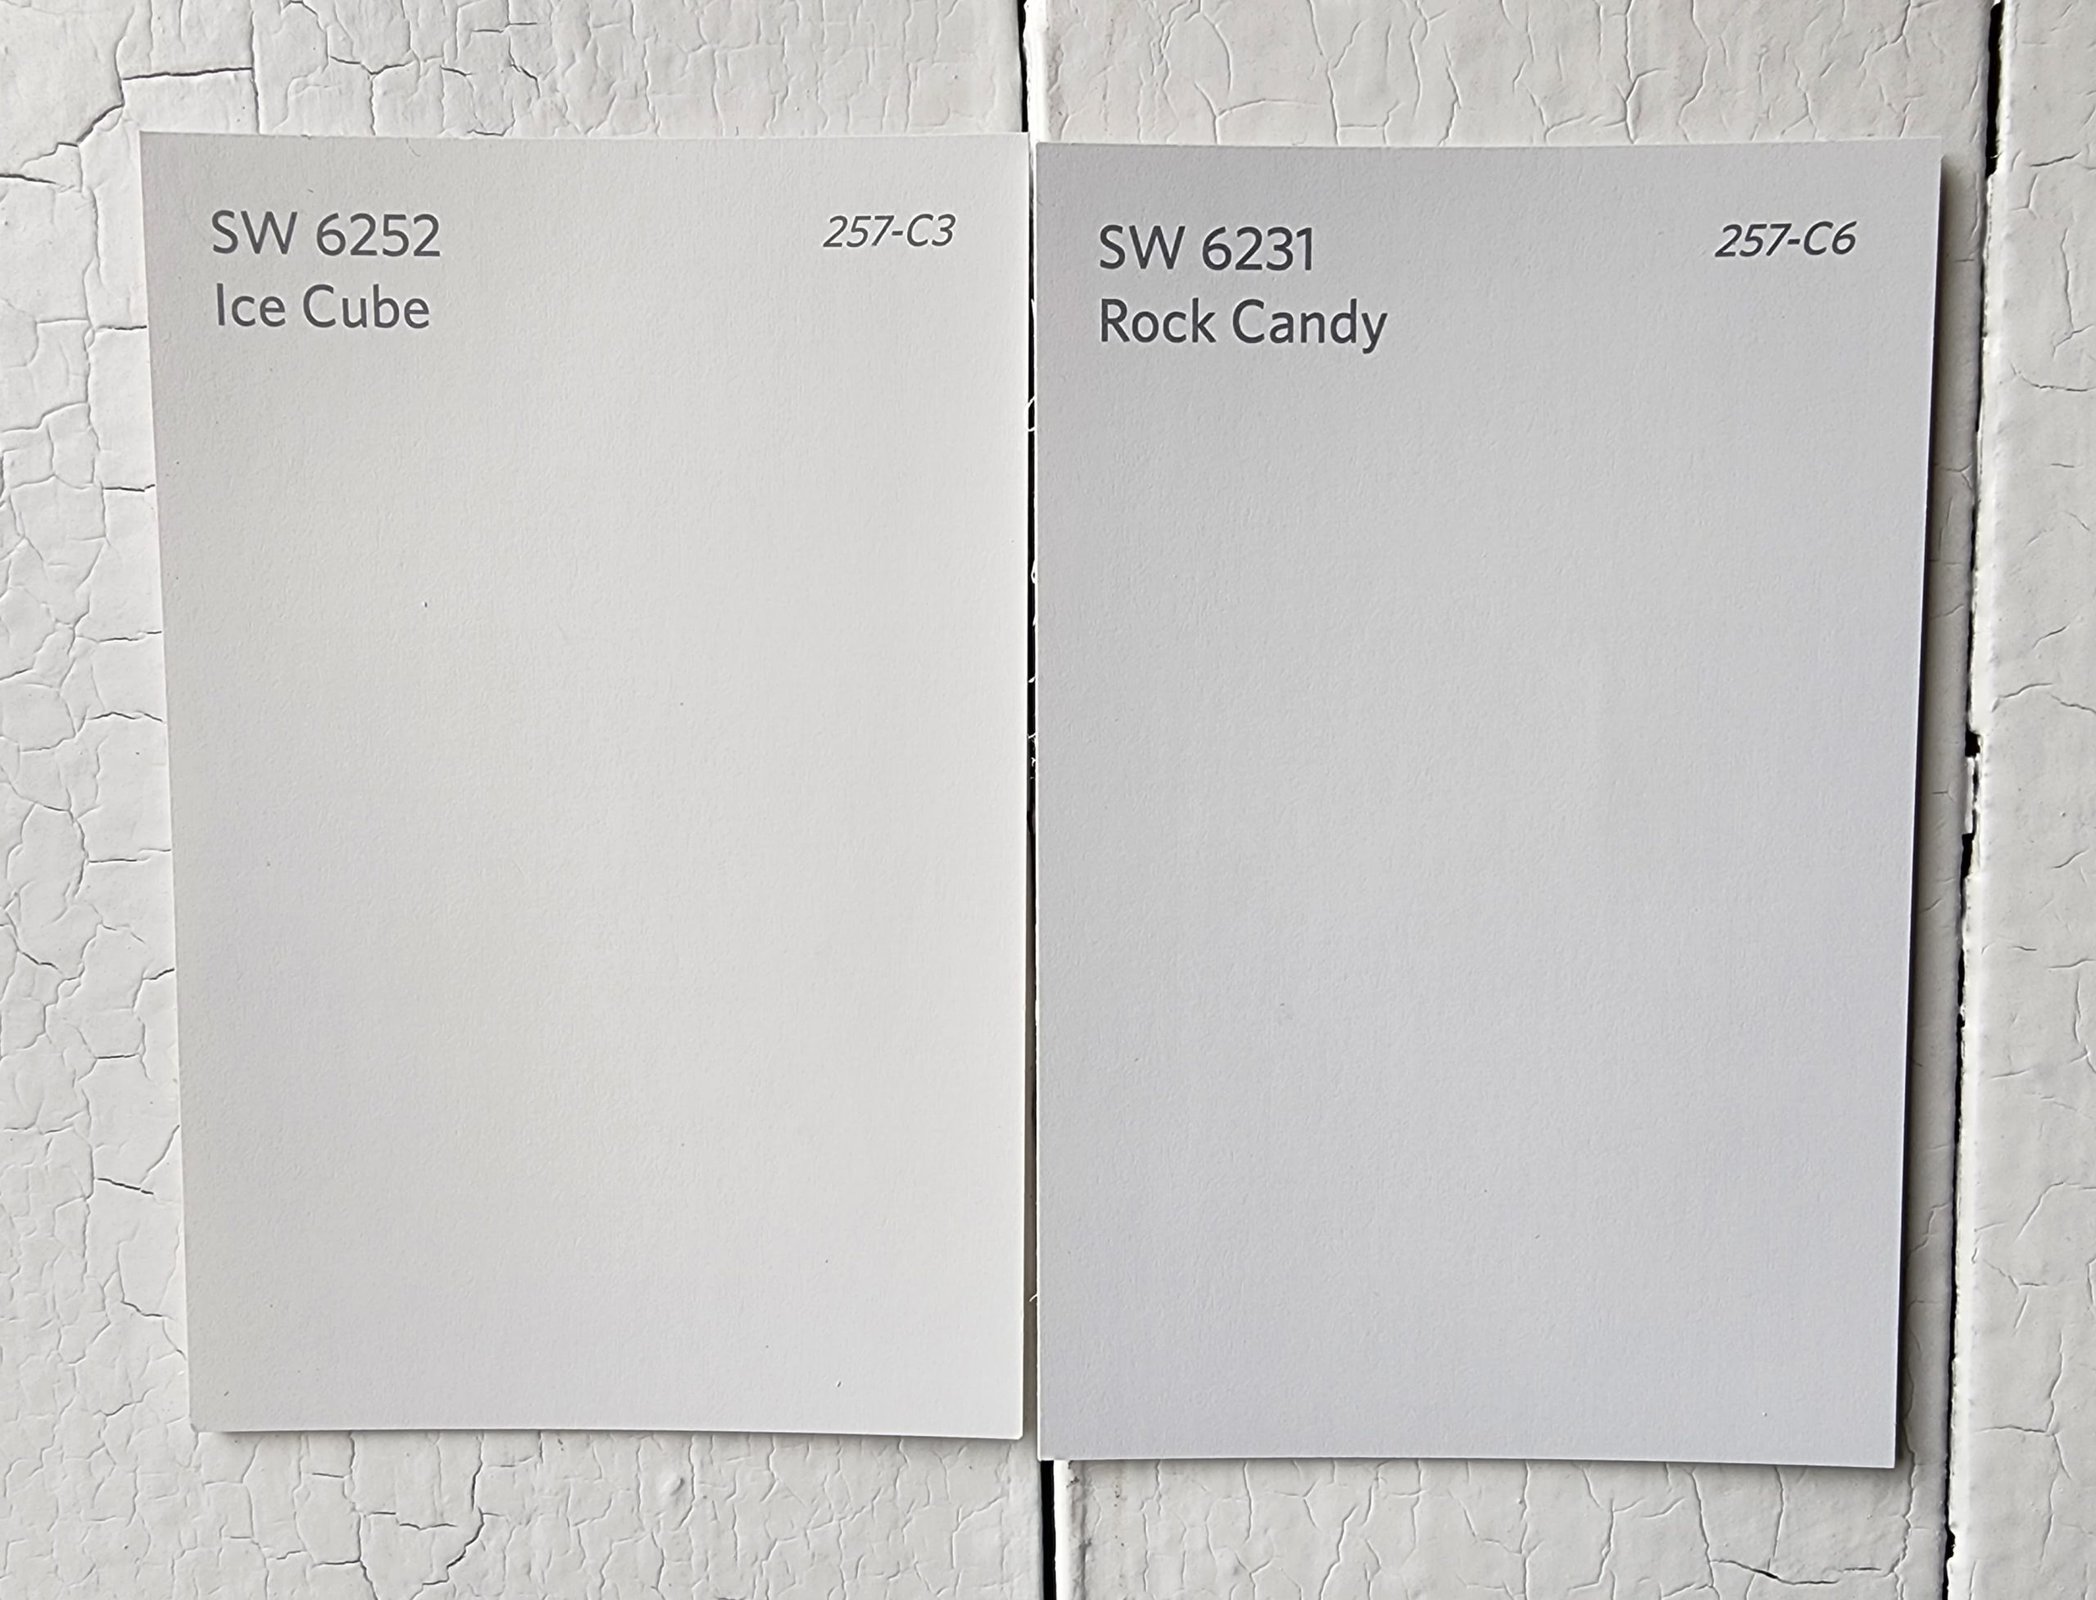  Ice Cube vs Rock Candy by Sherwin Williams scaled